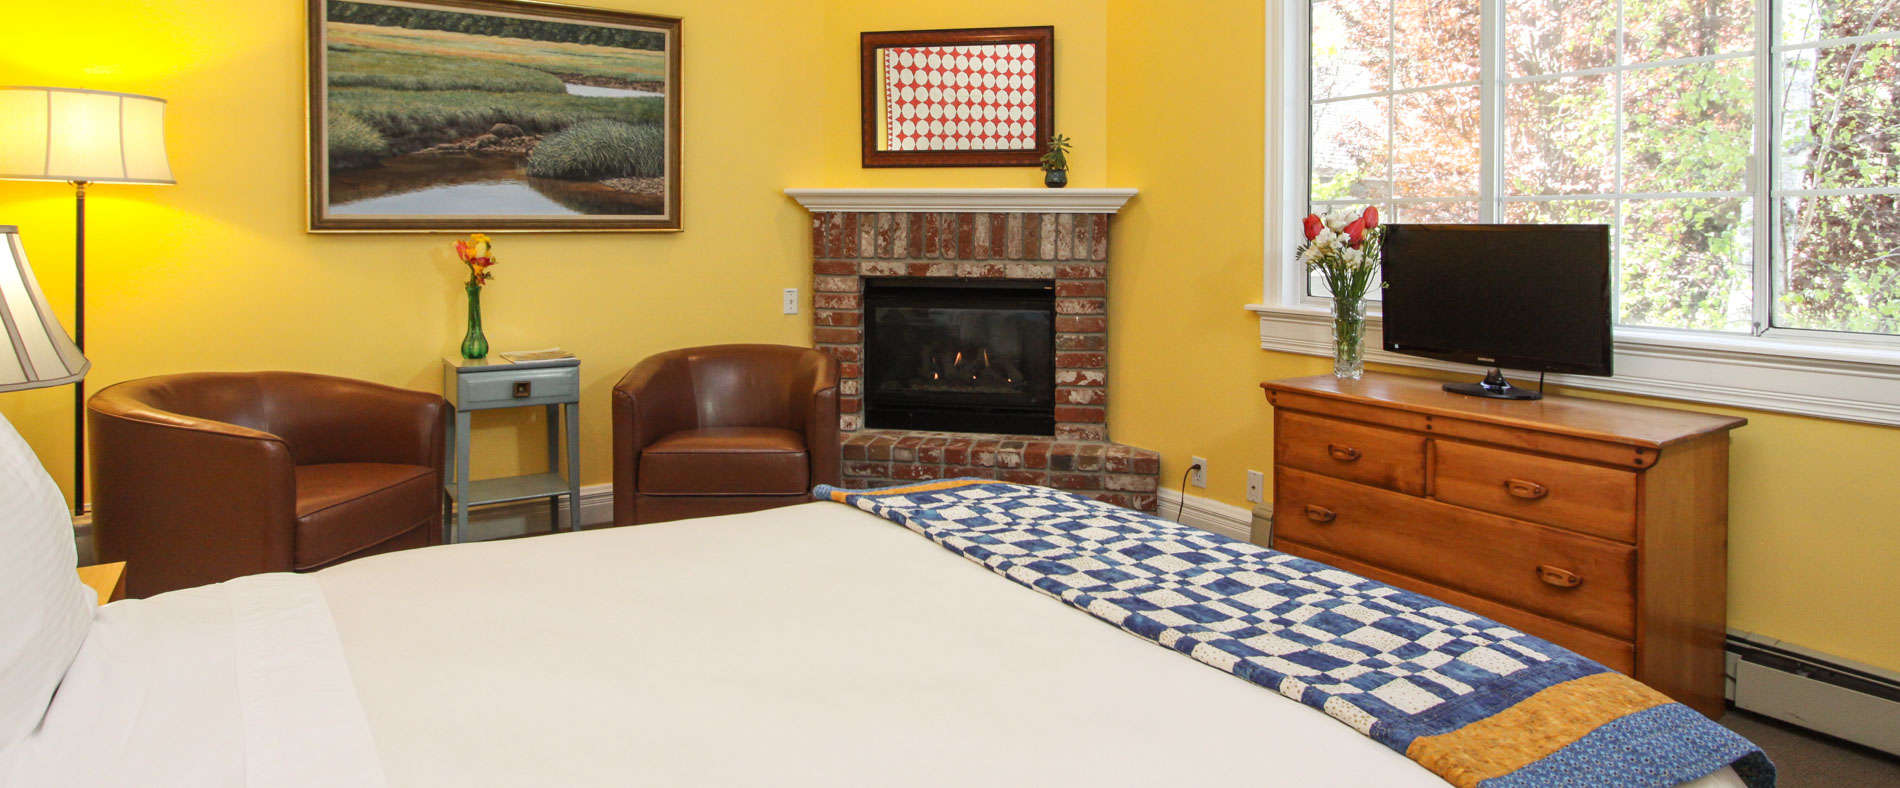 quilt room with fireplace and bed and chairs